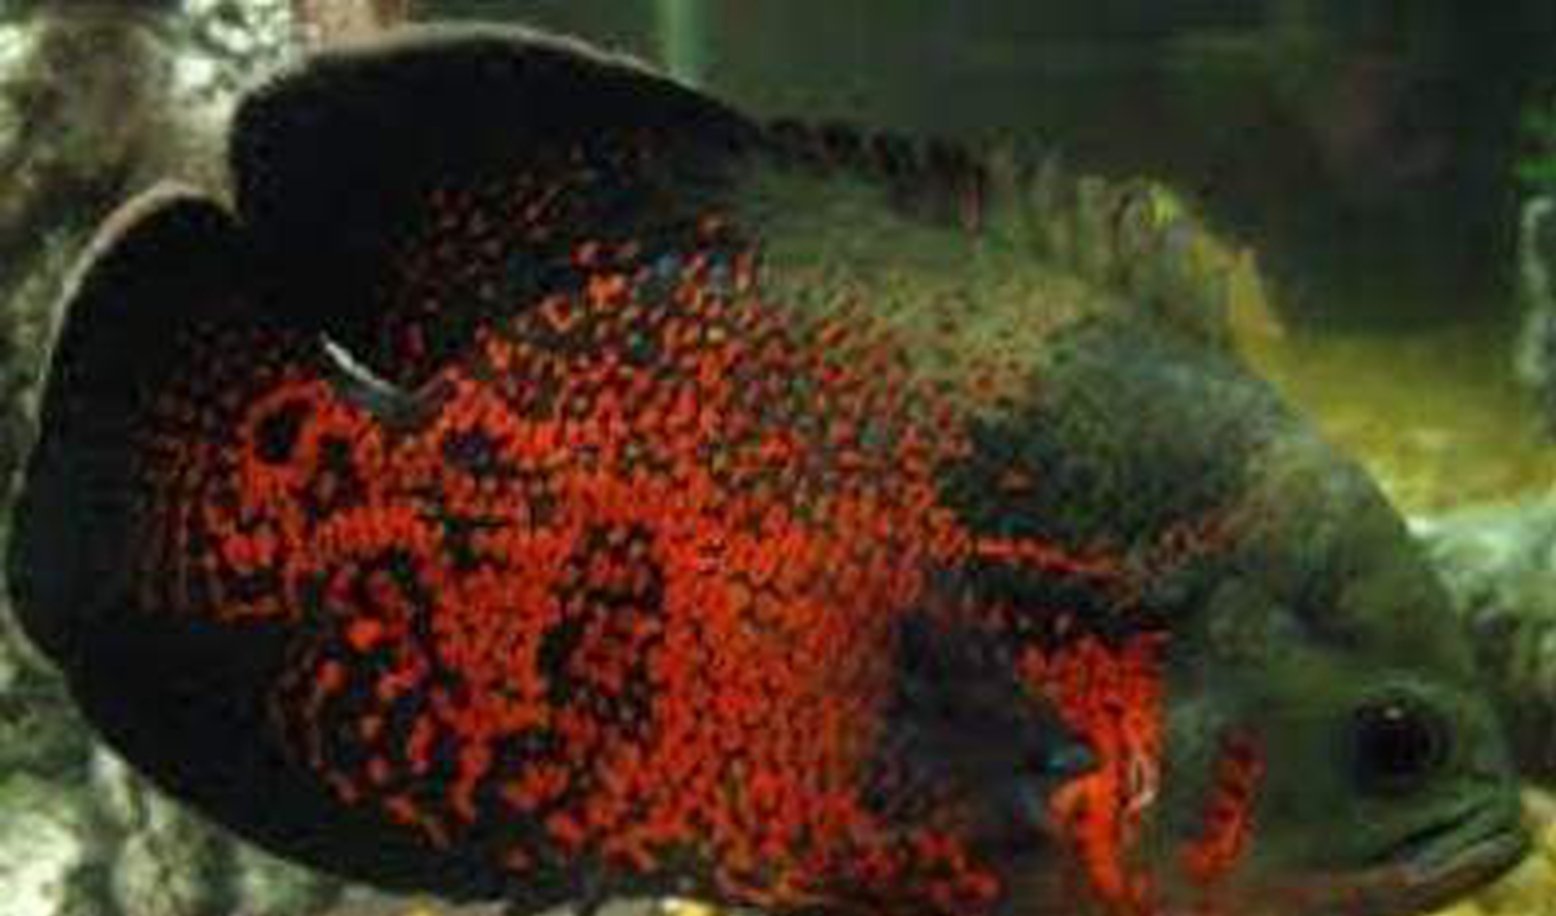 X1 Tiger Oscar Large 4" - 6" Each - Freshwater Package-Freshwater Fish Package-www.YourFishStore.com